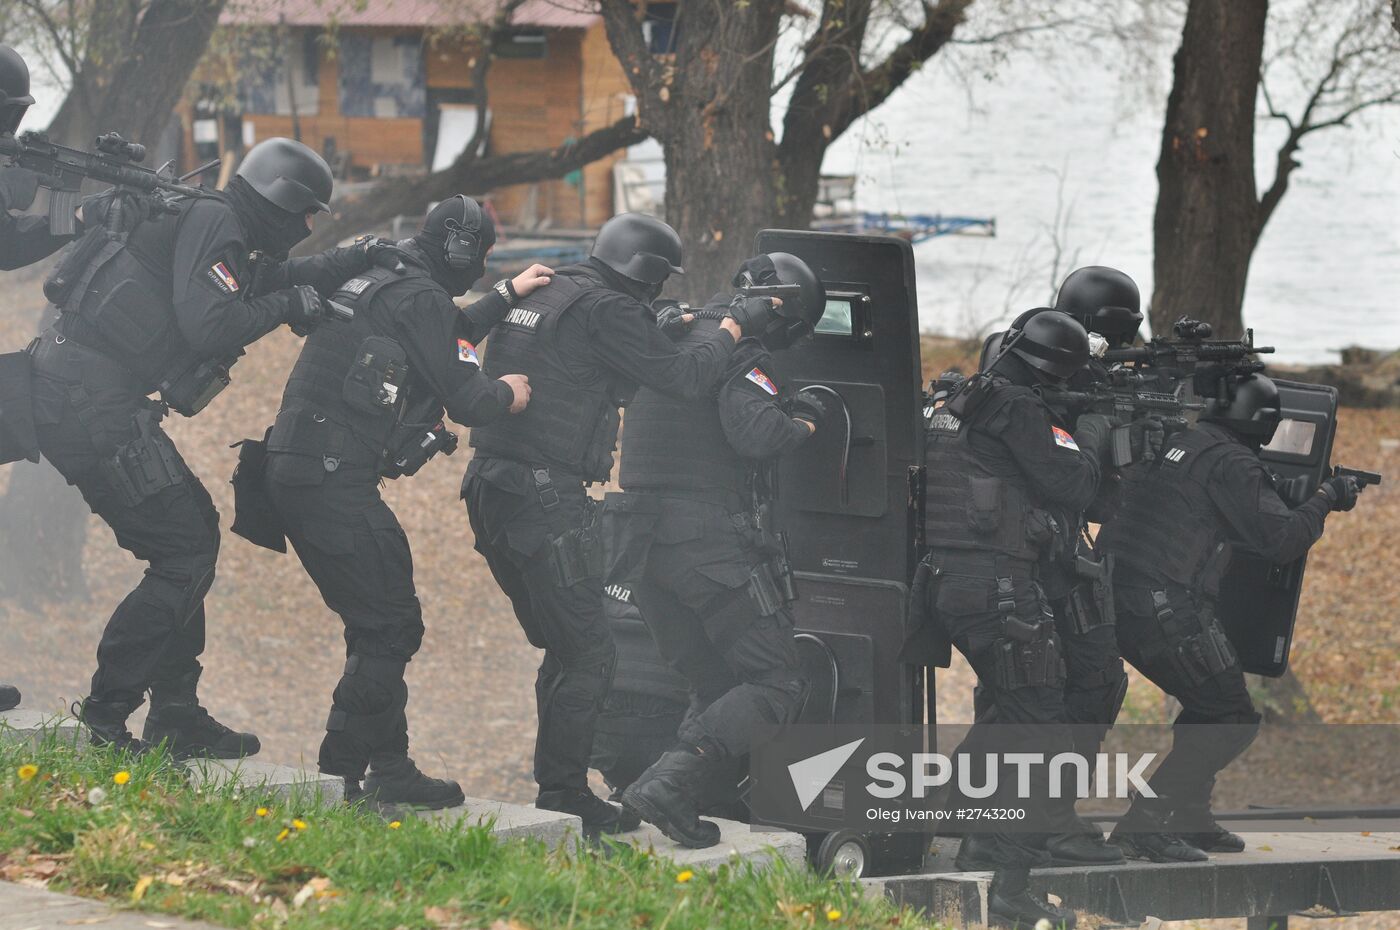 Demonstration performances of counter-terrorism units of Serbian Ministries of Interior and Defense, and special services